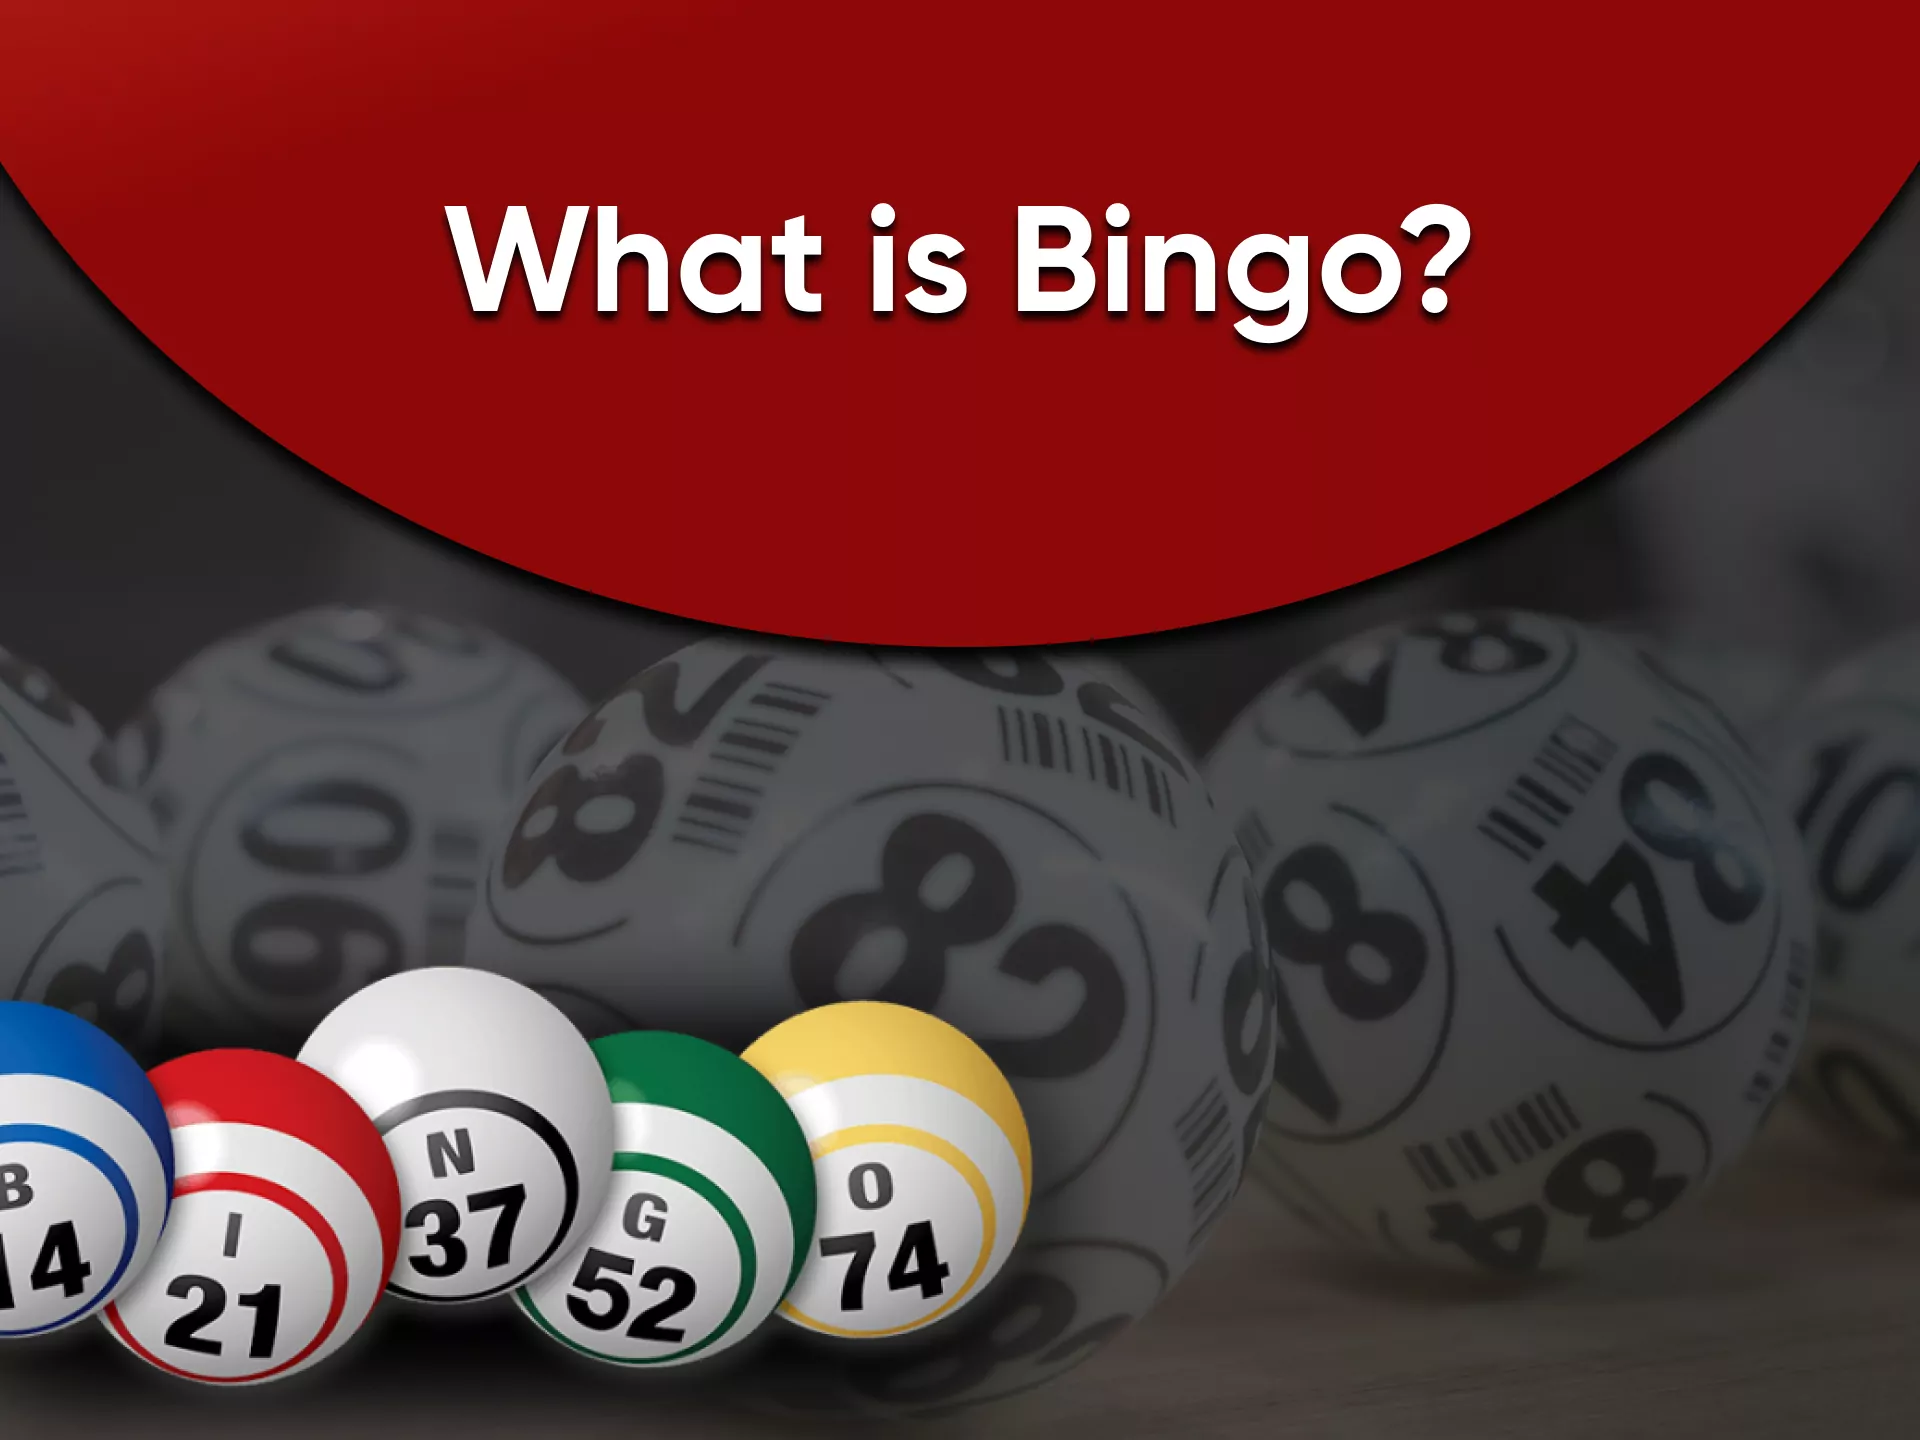 Read the information before playing Bingo.